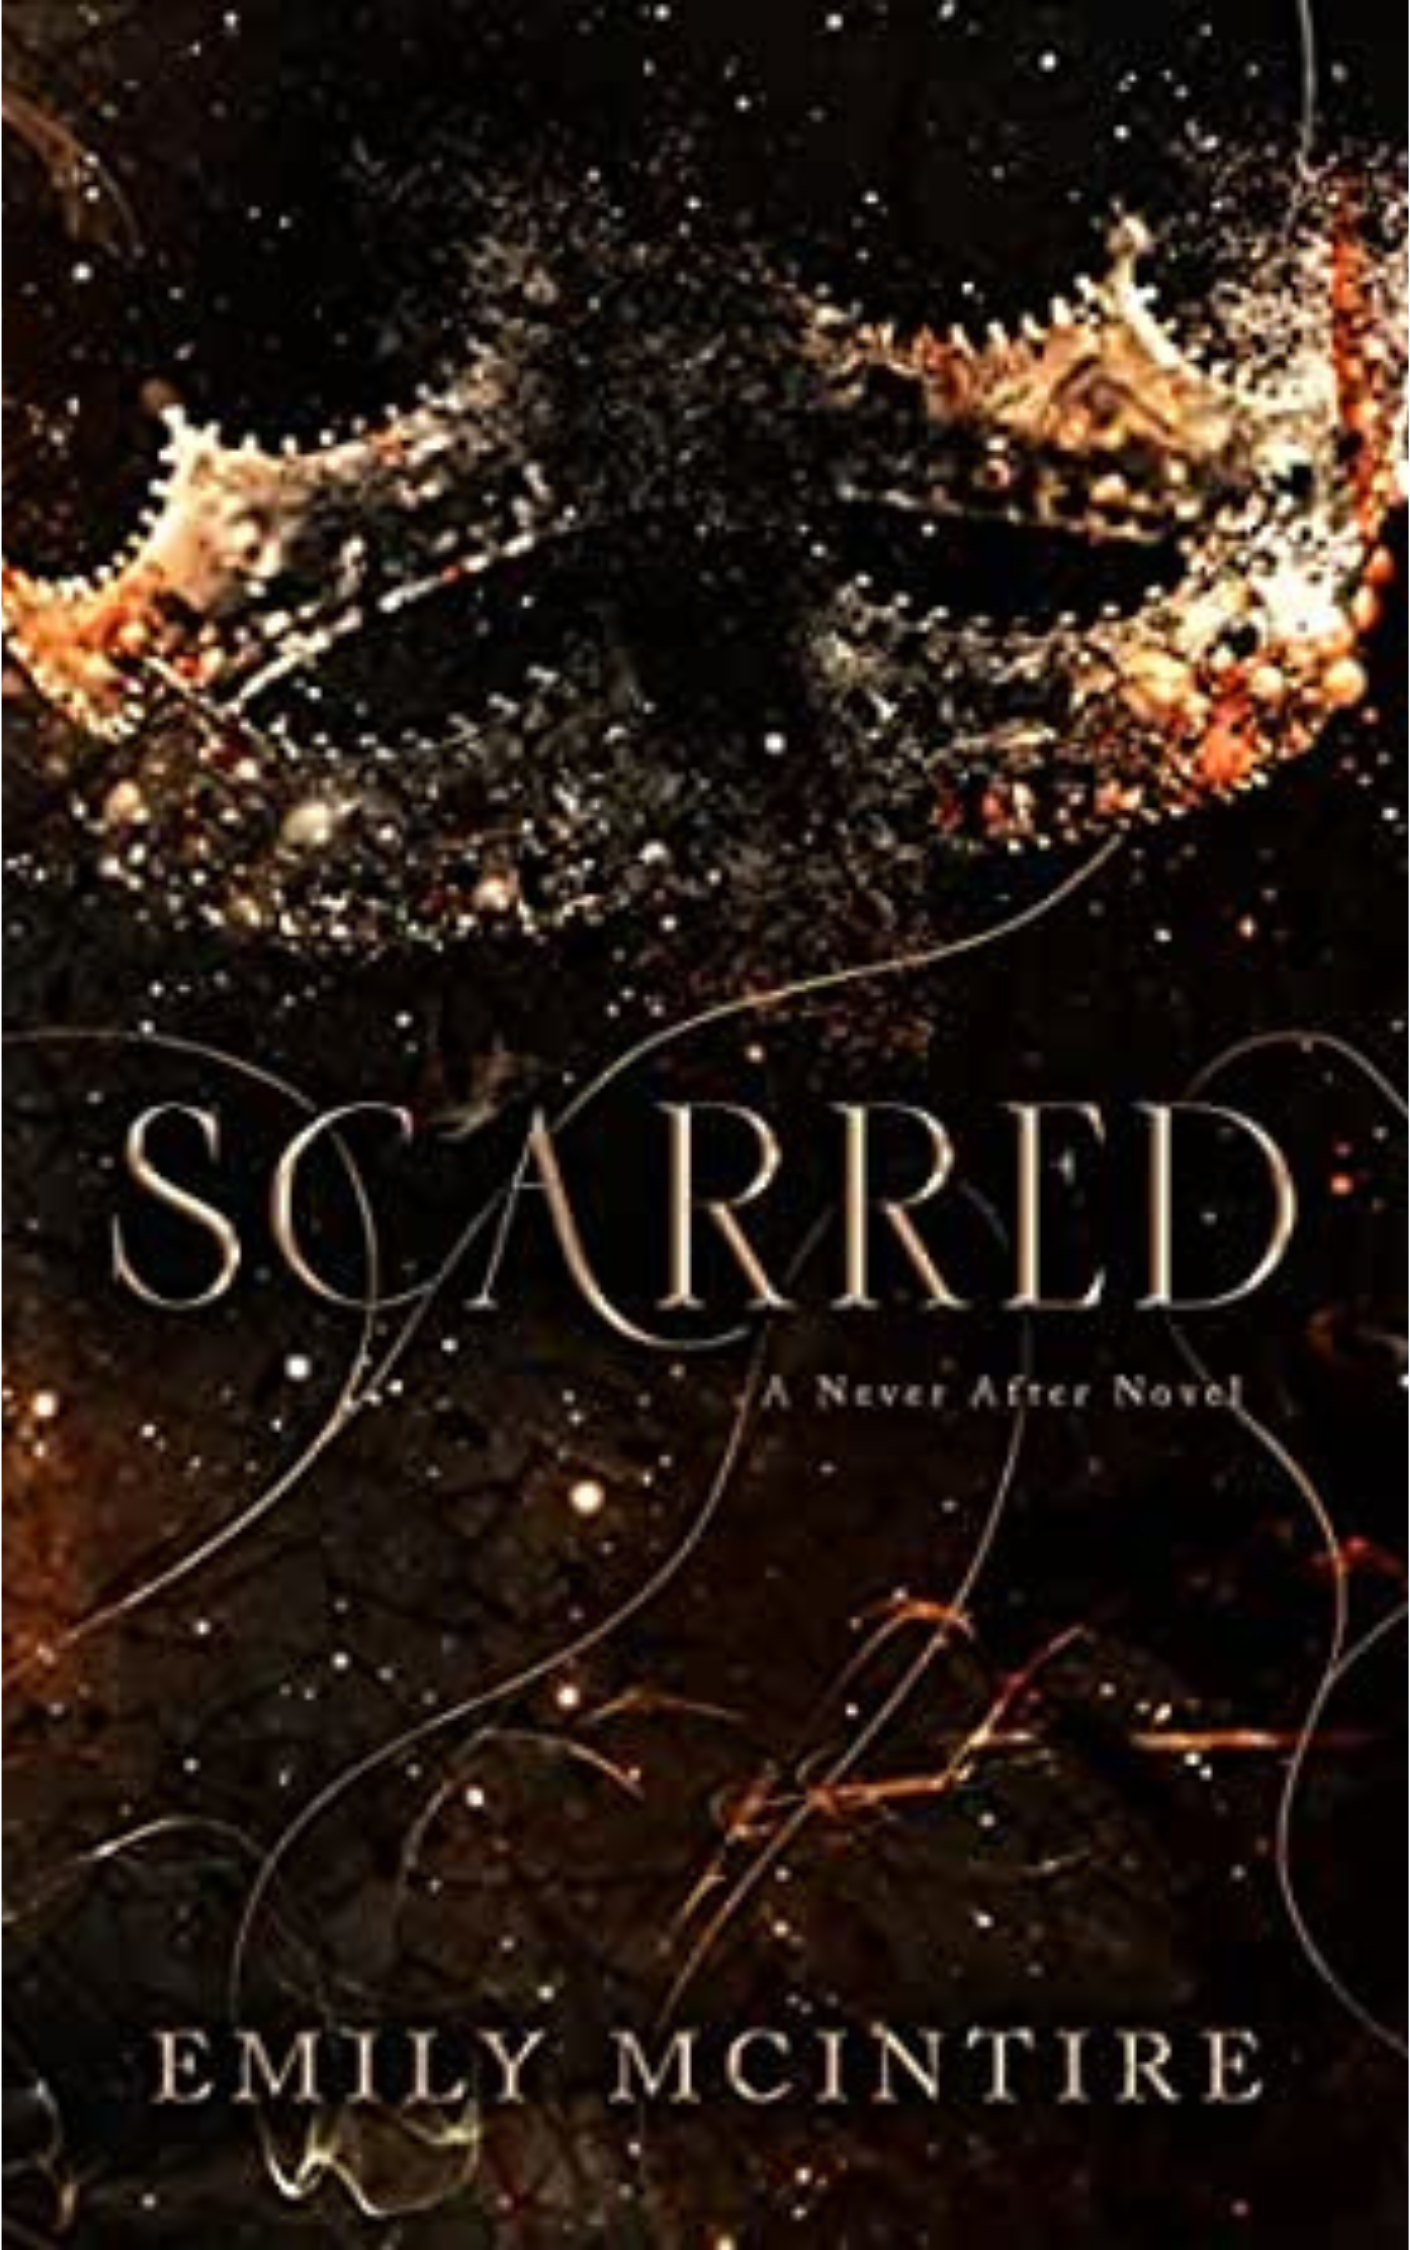 SCARRED: A NEVER AFTER NOVEL by EMILY MCINTIRE